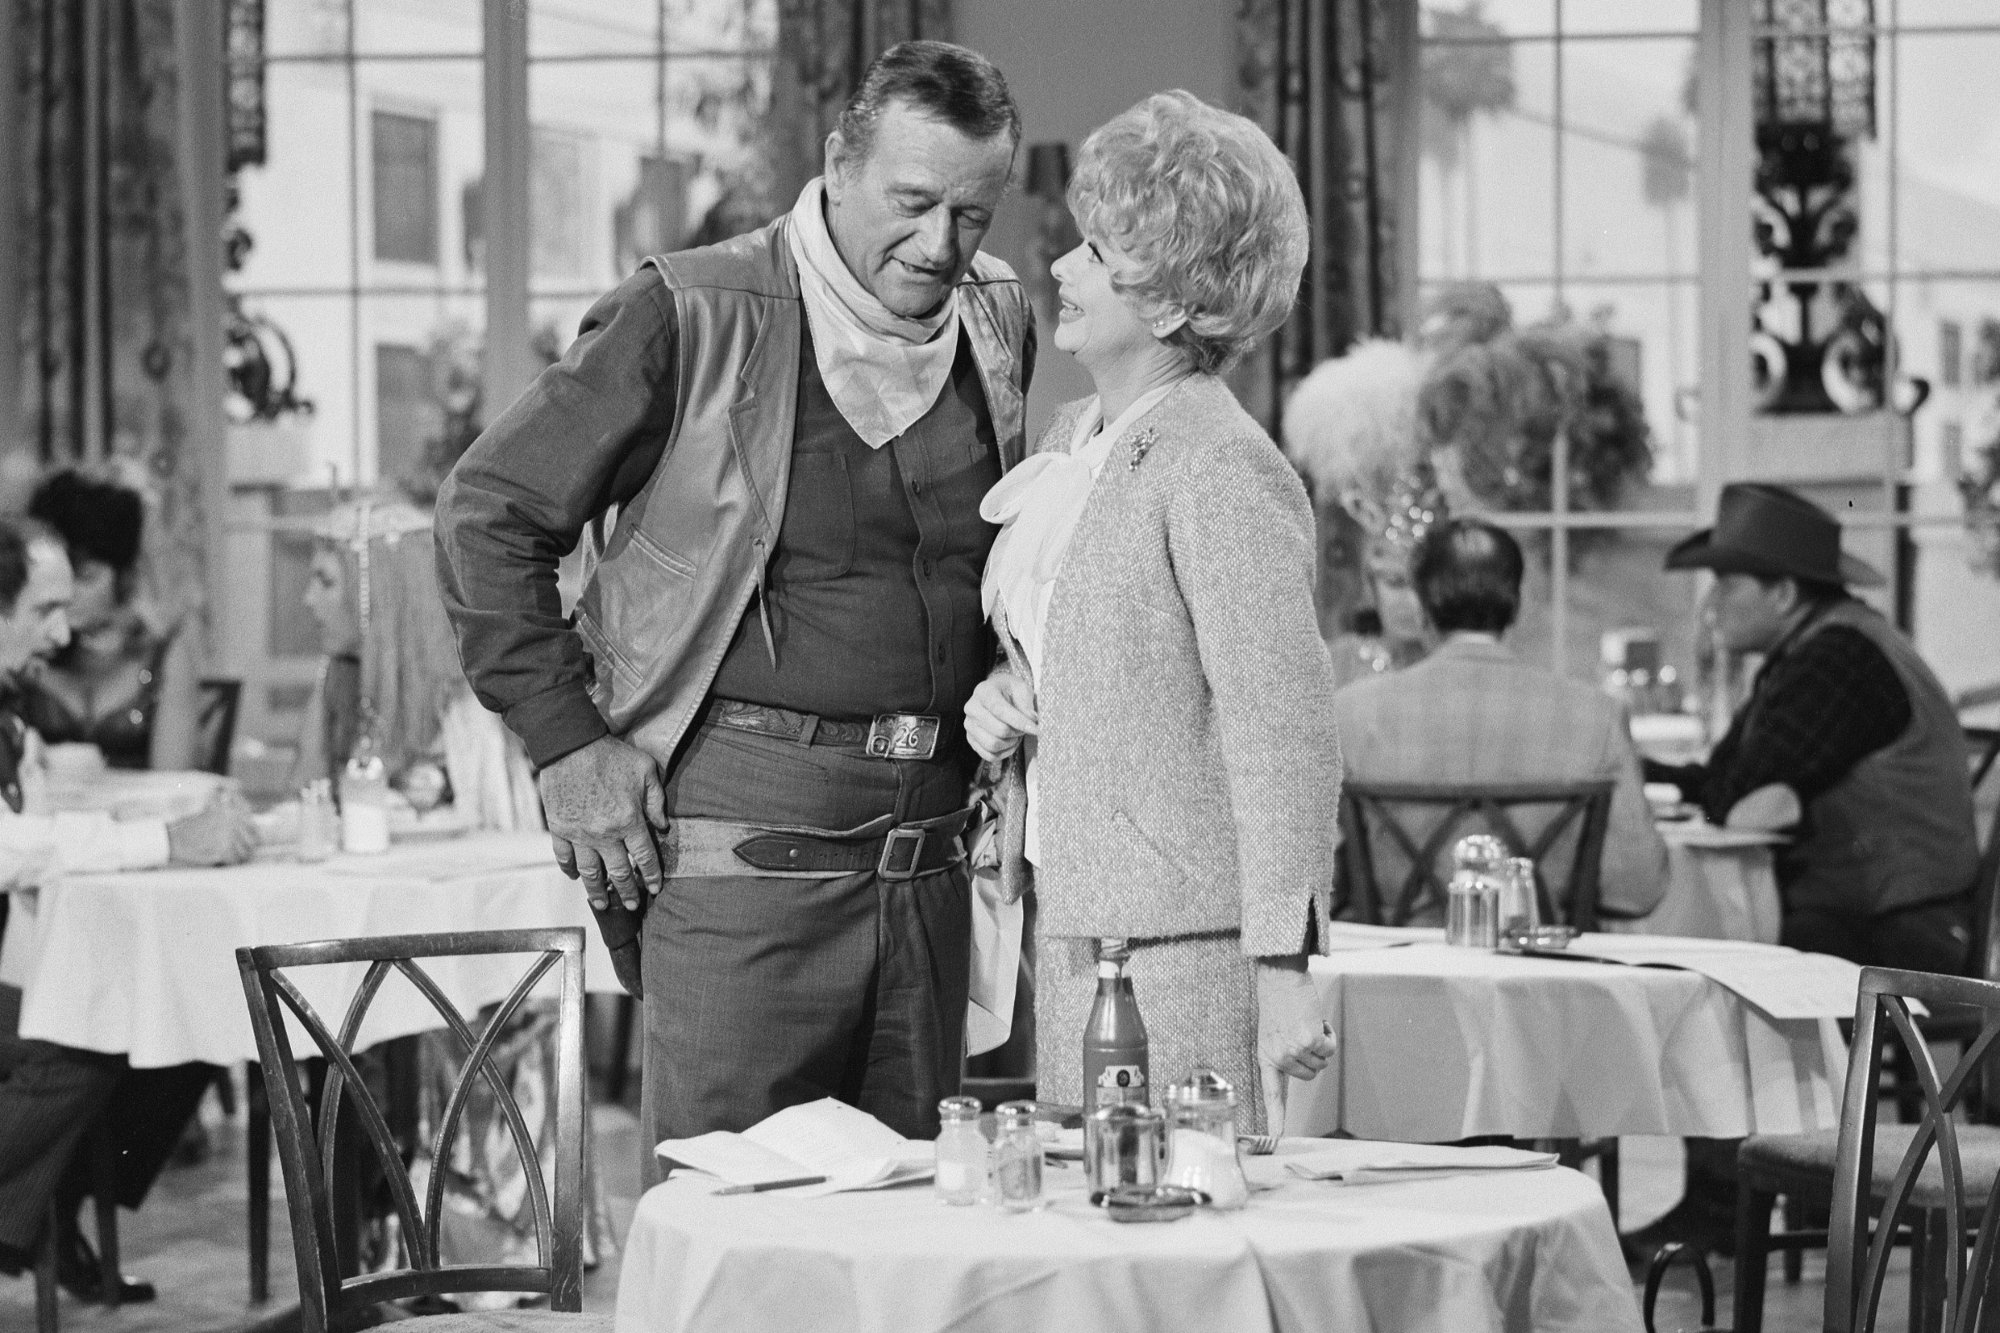 'The Lucy Show' John Wayne as himself and Lucille Ball as Lucy Carmichael. Black-and-white photo of Wayne wearing a cowboy outfit and Ball wearing a jacket and skirt. They're standing behind a table at a restaurant.